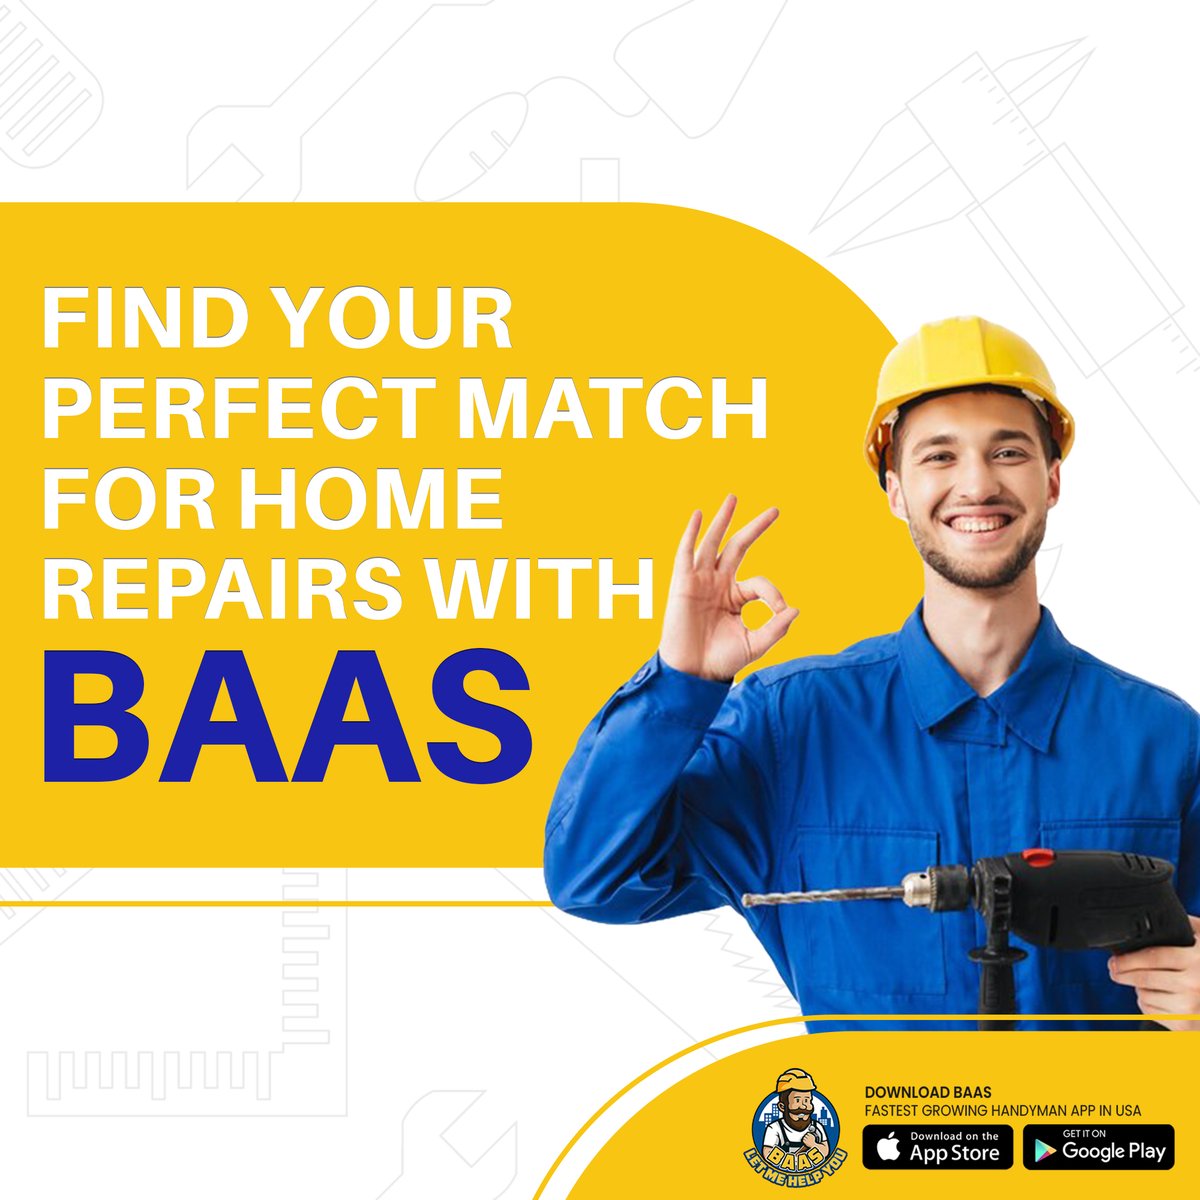 ✅ Do you have a faulty appliance that needs repair? BAAS App's appliance repair is top notch and you can choose the best professional that fits your needs. 🛠️🏡

#repair  #baasitnow #handyman #handymanservices #NoFee #appliances #Download #cleaningservices #electricians  #app